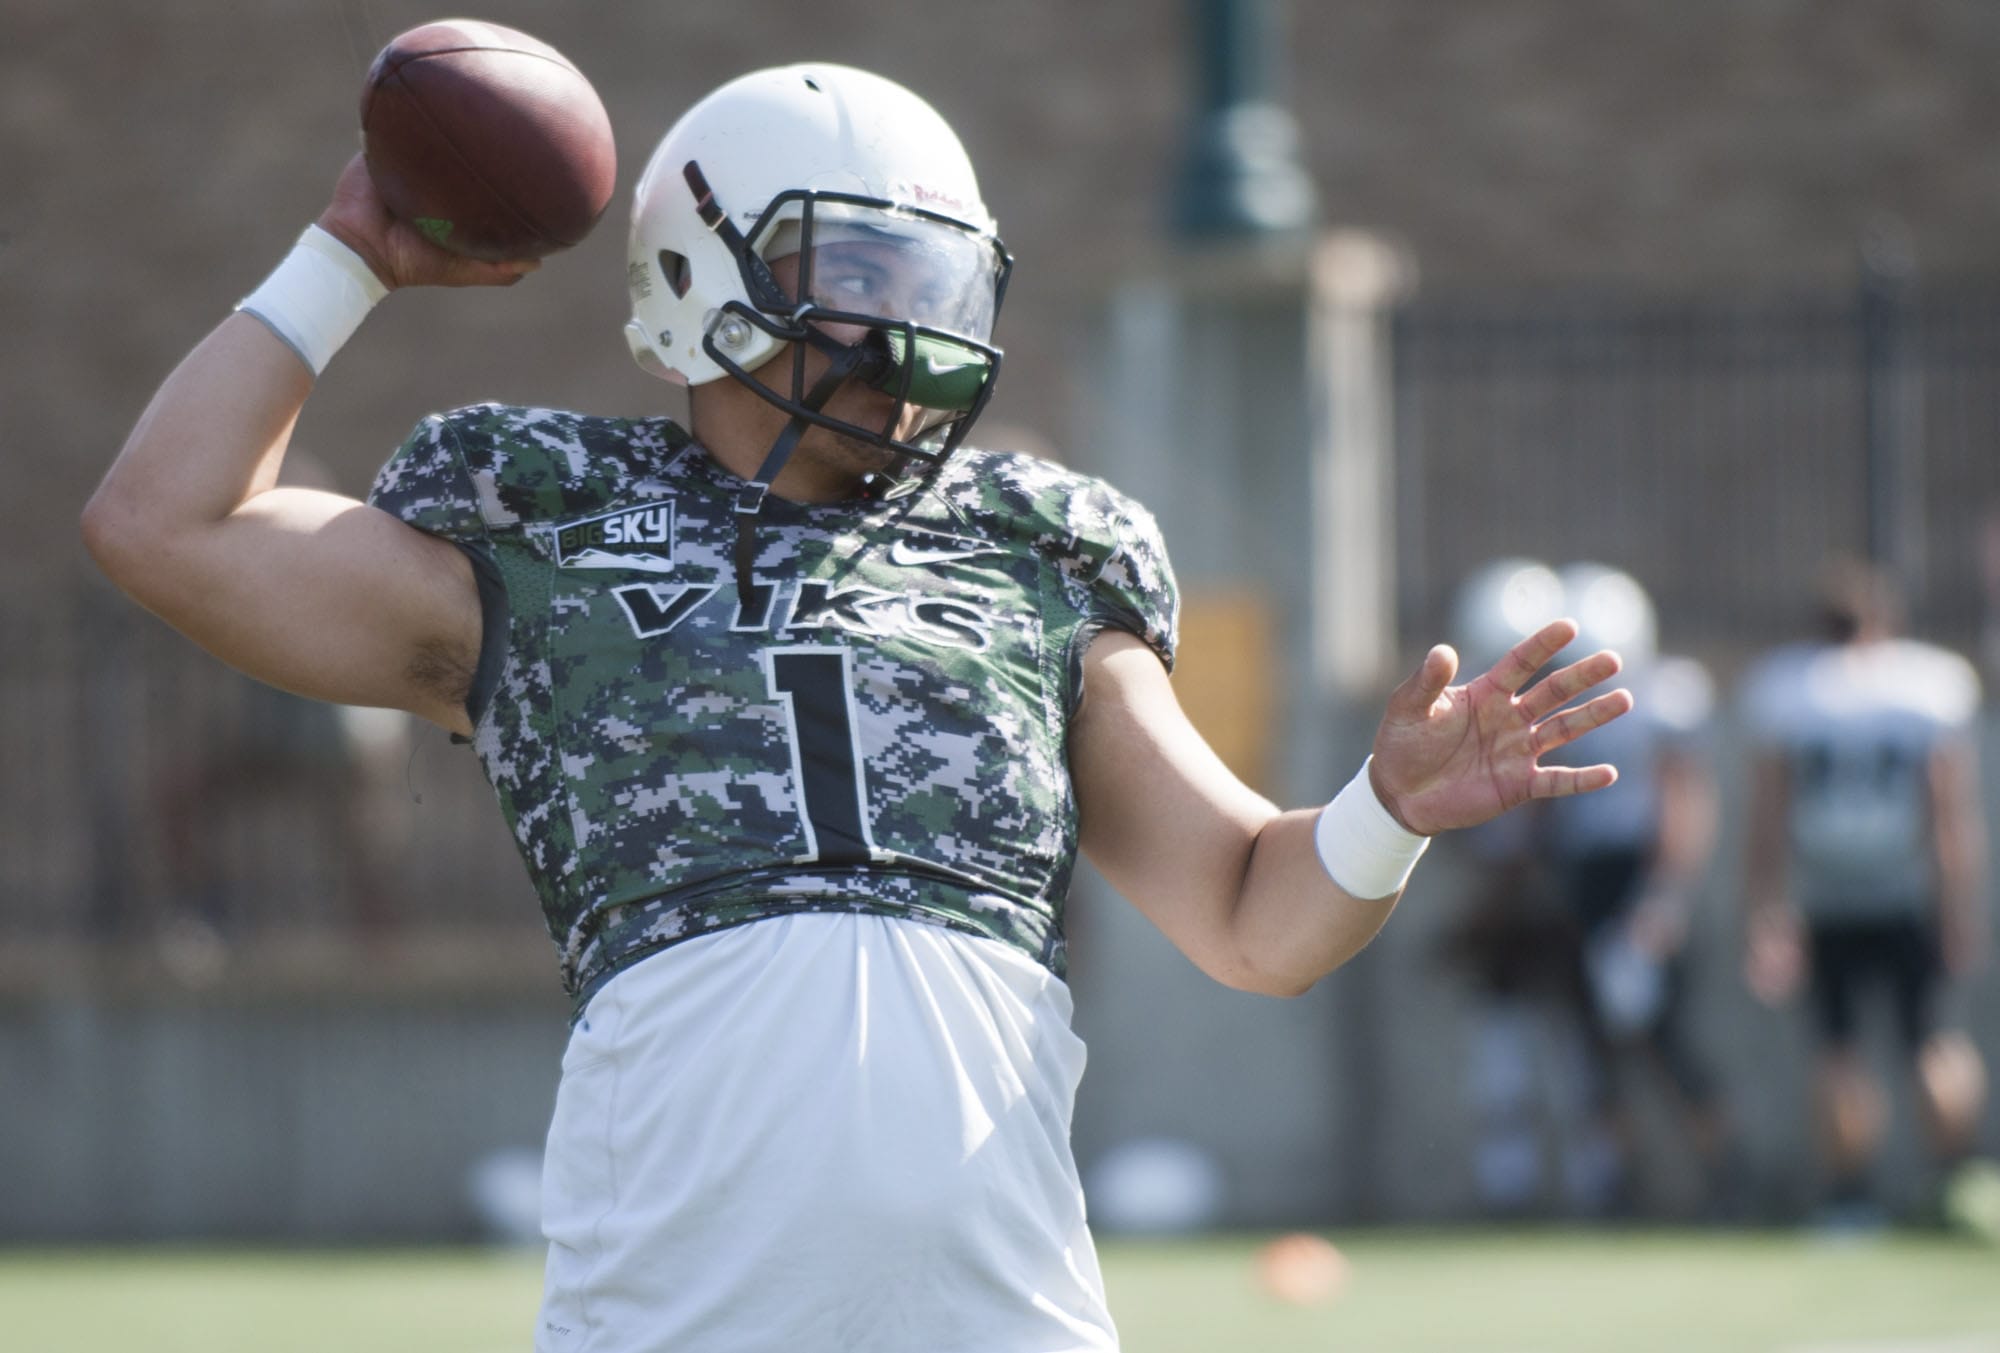 Portland State University football player from Clark County, senior quarterback Kieran McDonagh, at a practice in Portland Wednesday August 26, 2015.